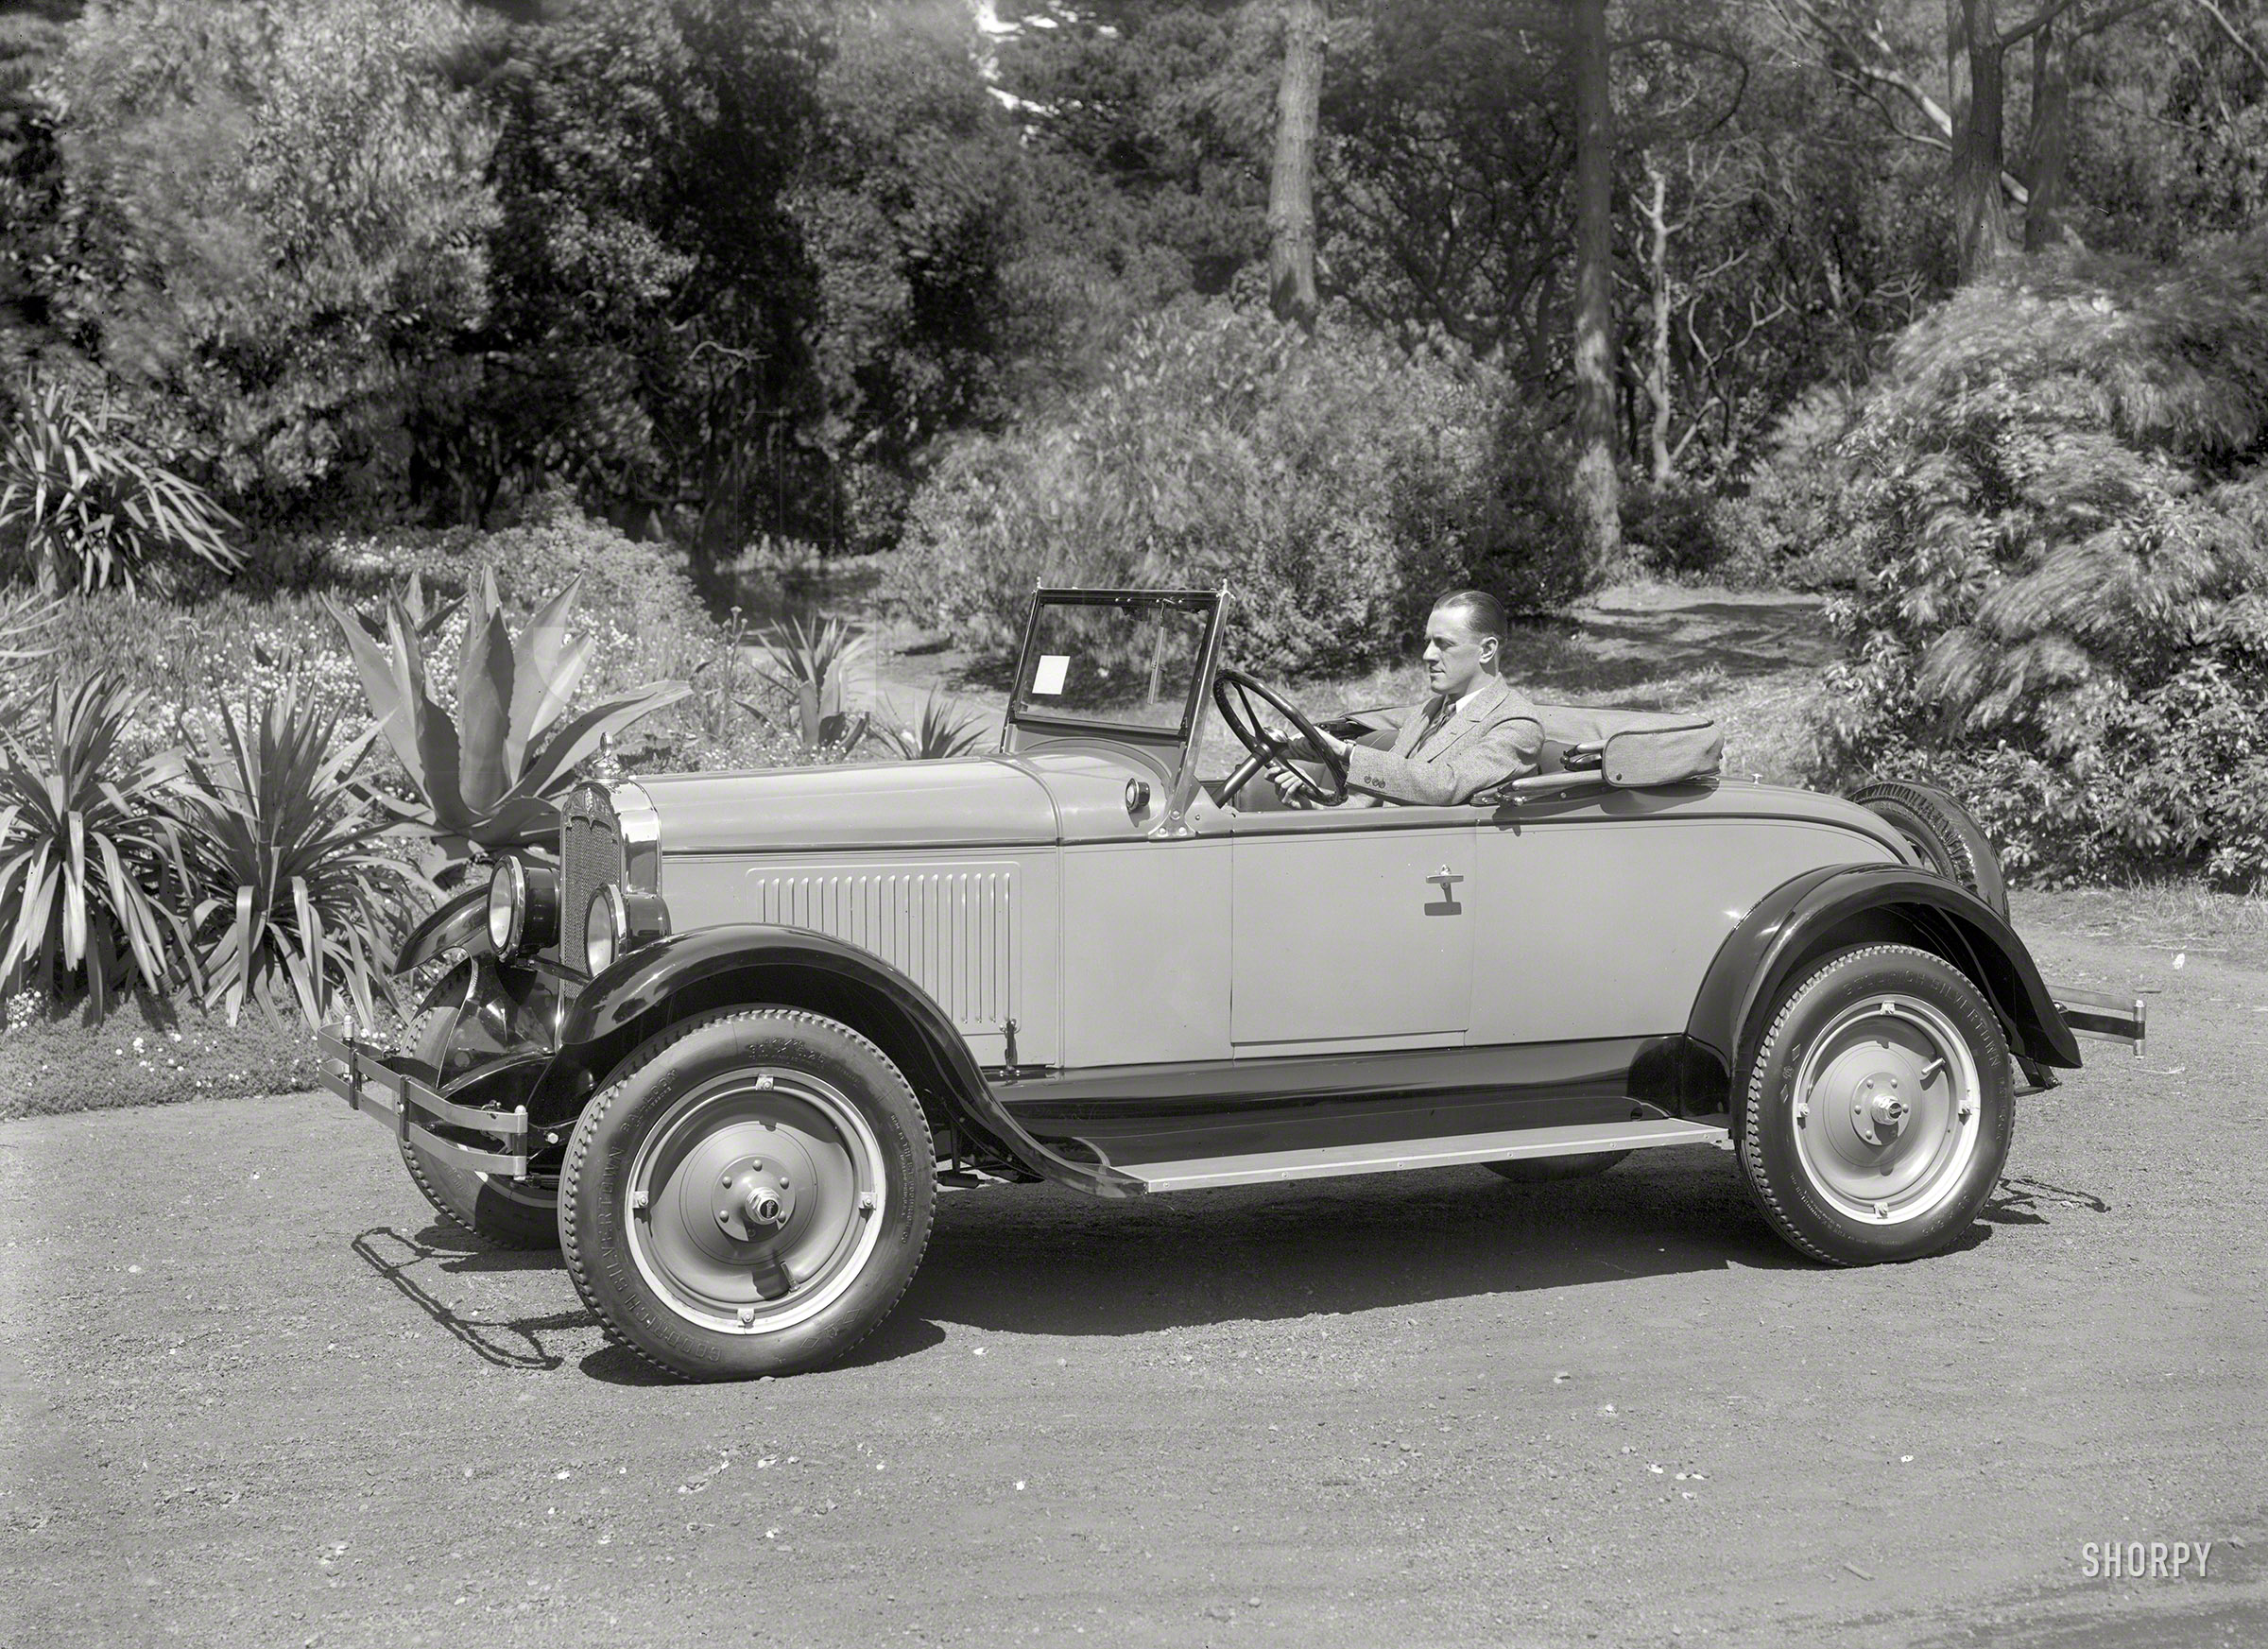 San Francisco, 1927. "Oldsmobile roadster at Golden Gate Park." Latest listing in the Shorpy Catalogue of Jaunty Jalopies. 5x7 glass negative. View full size.